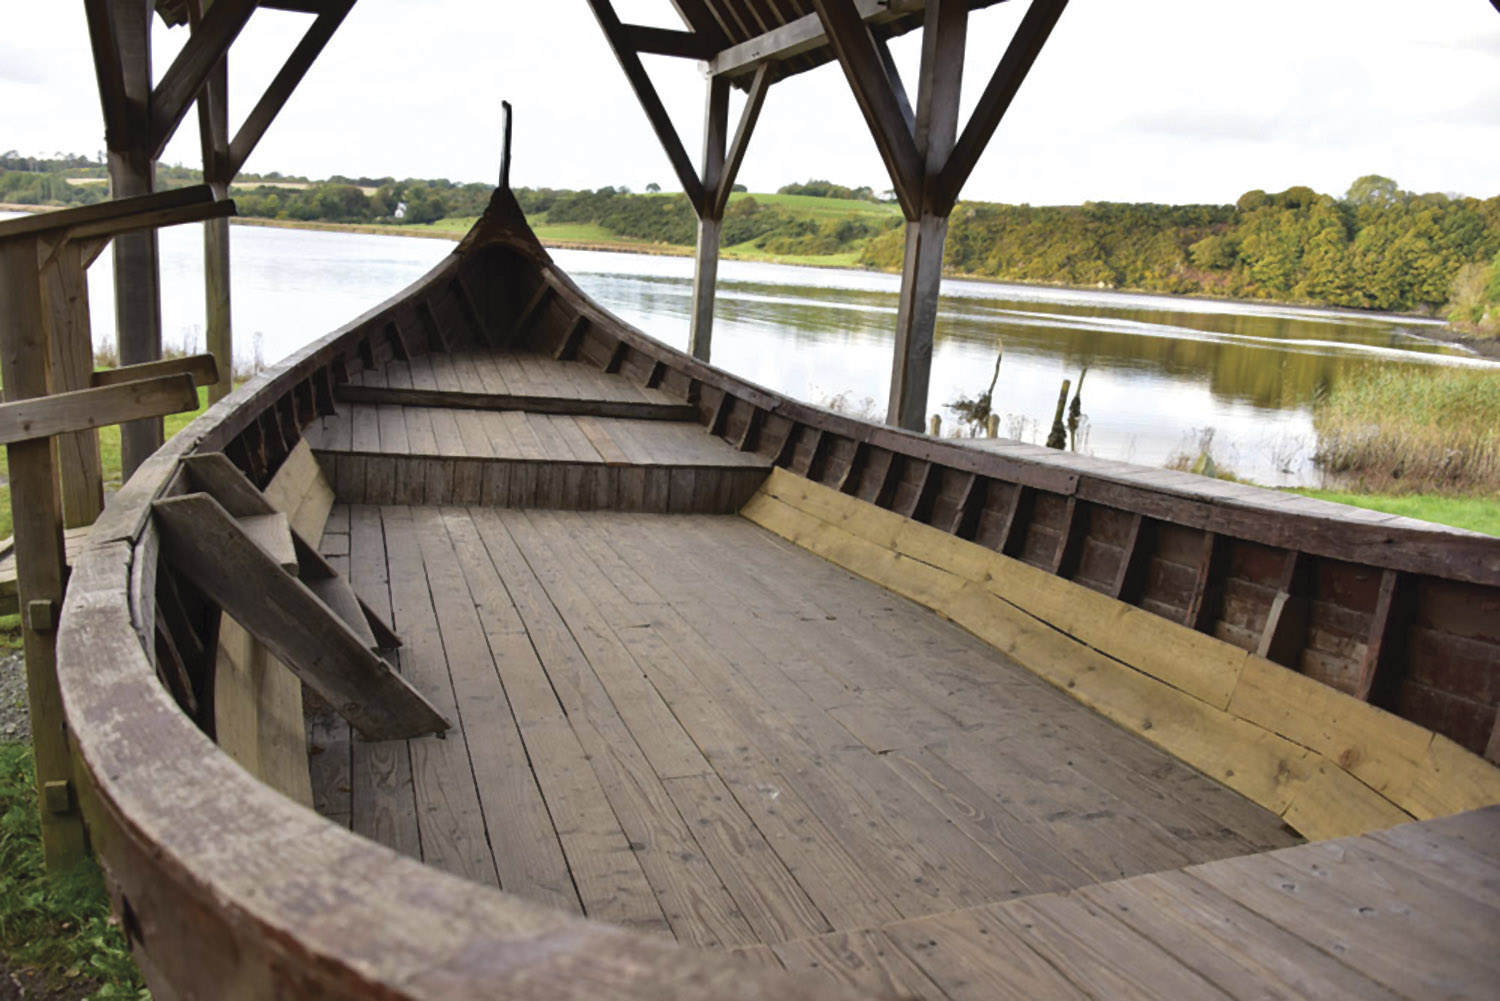 A Viking longboat in Wexford’s Irish National Heritage Park.